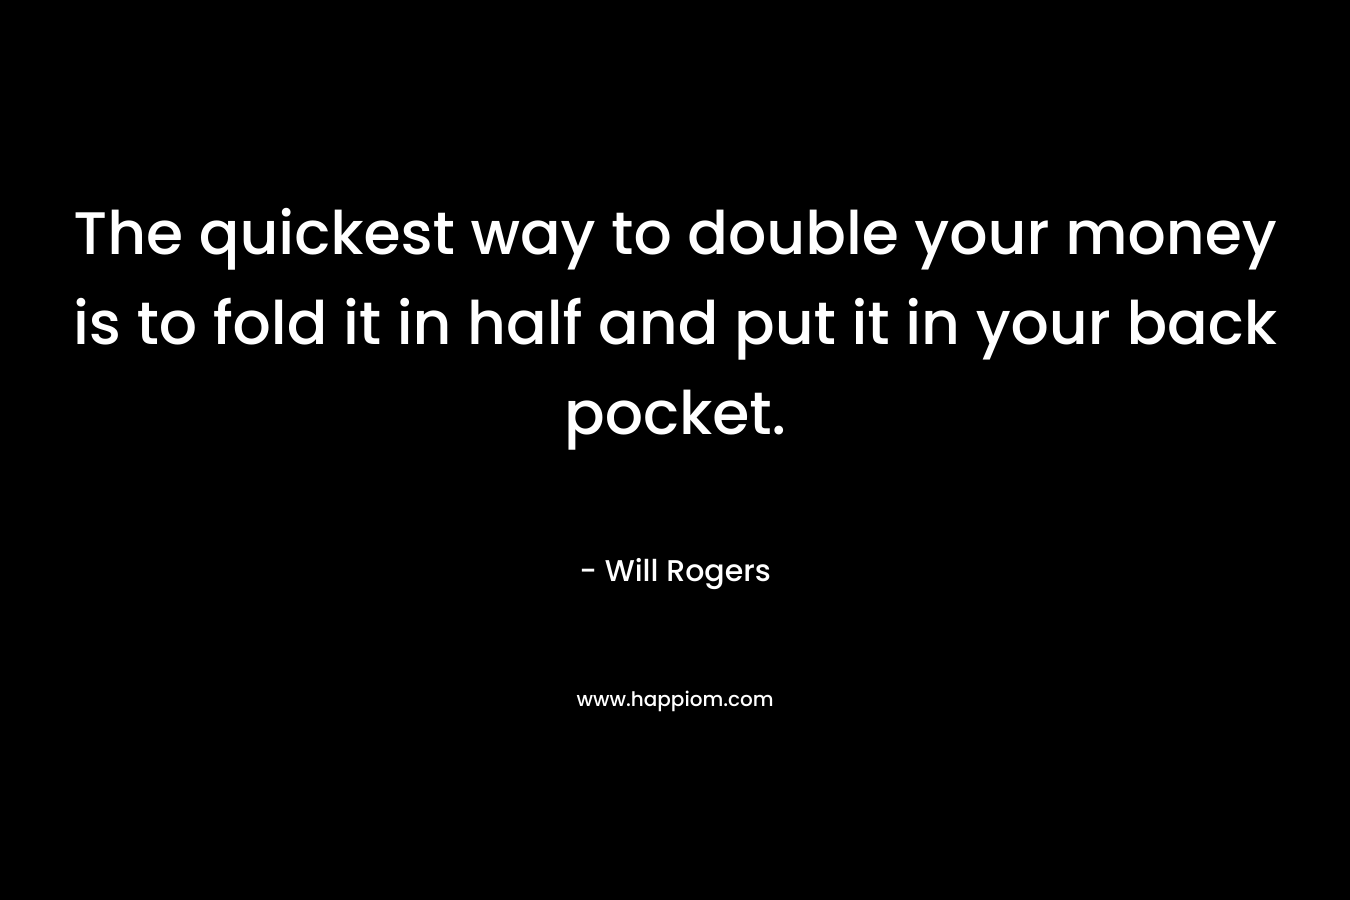 The quickest way to double your money is to fold it in half and put it in your back pocket. – Will Rogers